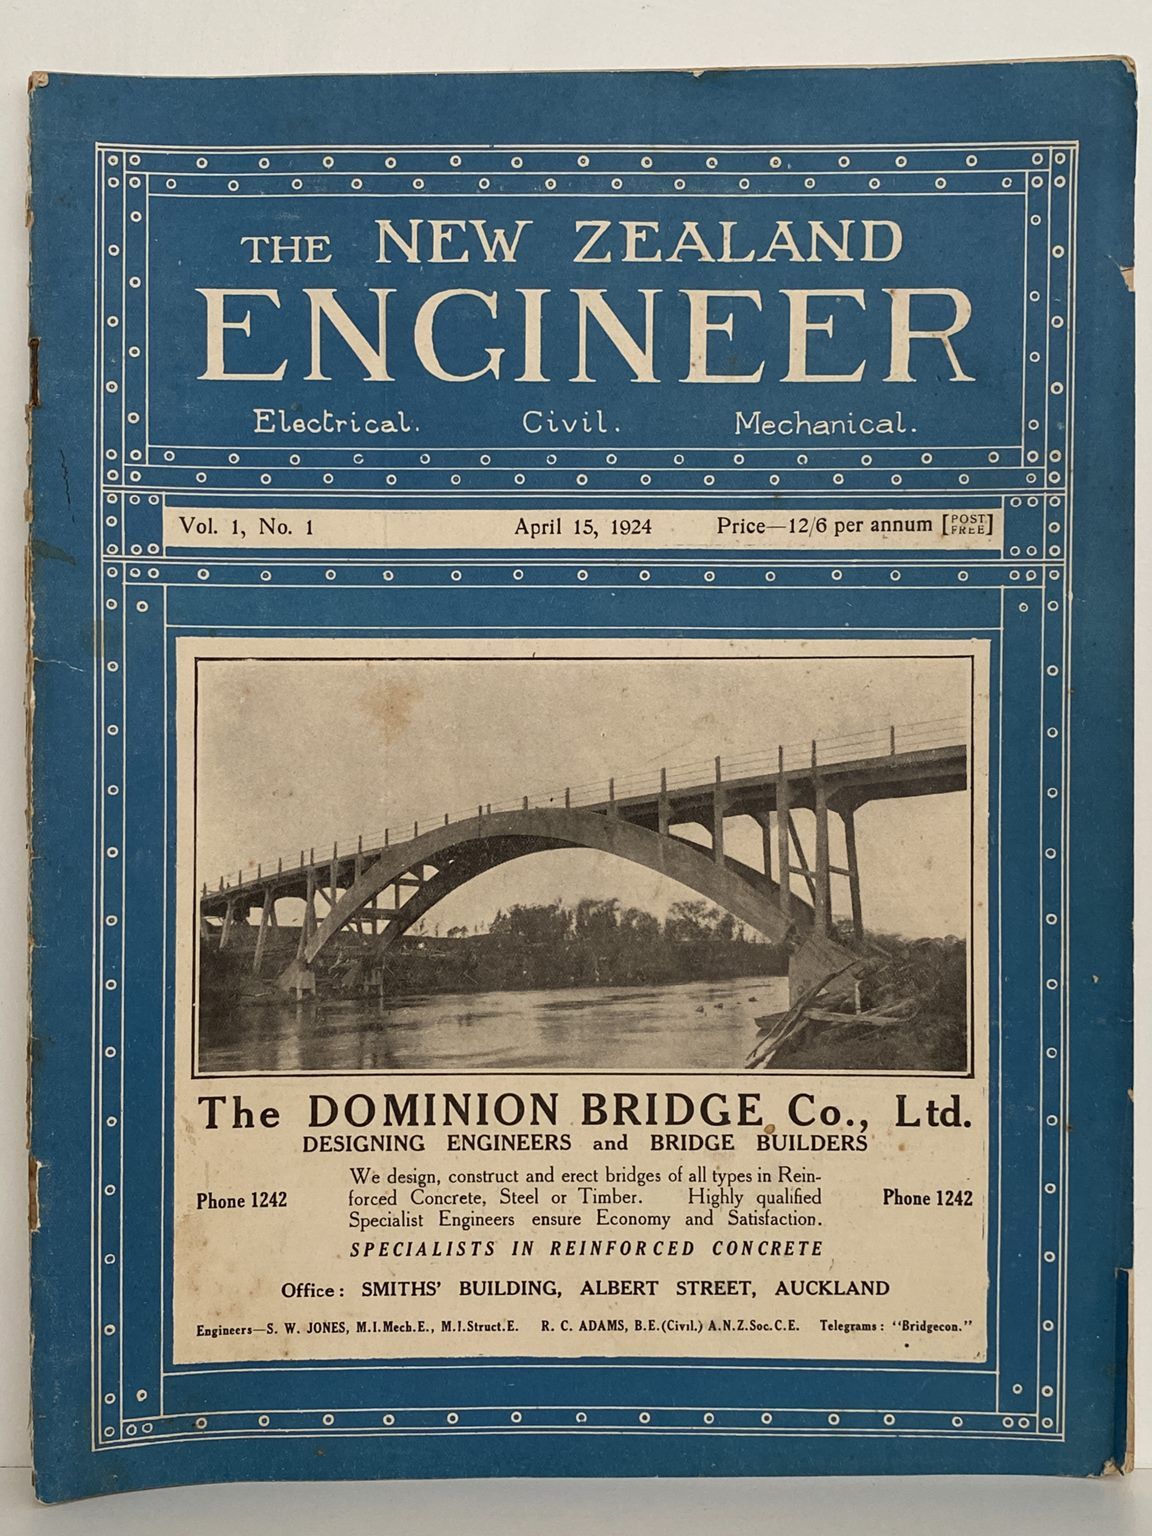 OLD MAGAZINE: The New Zealand Engineer Vol. 1, No. 1 - 15 April 1924